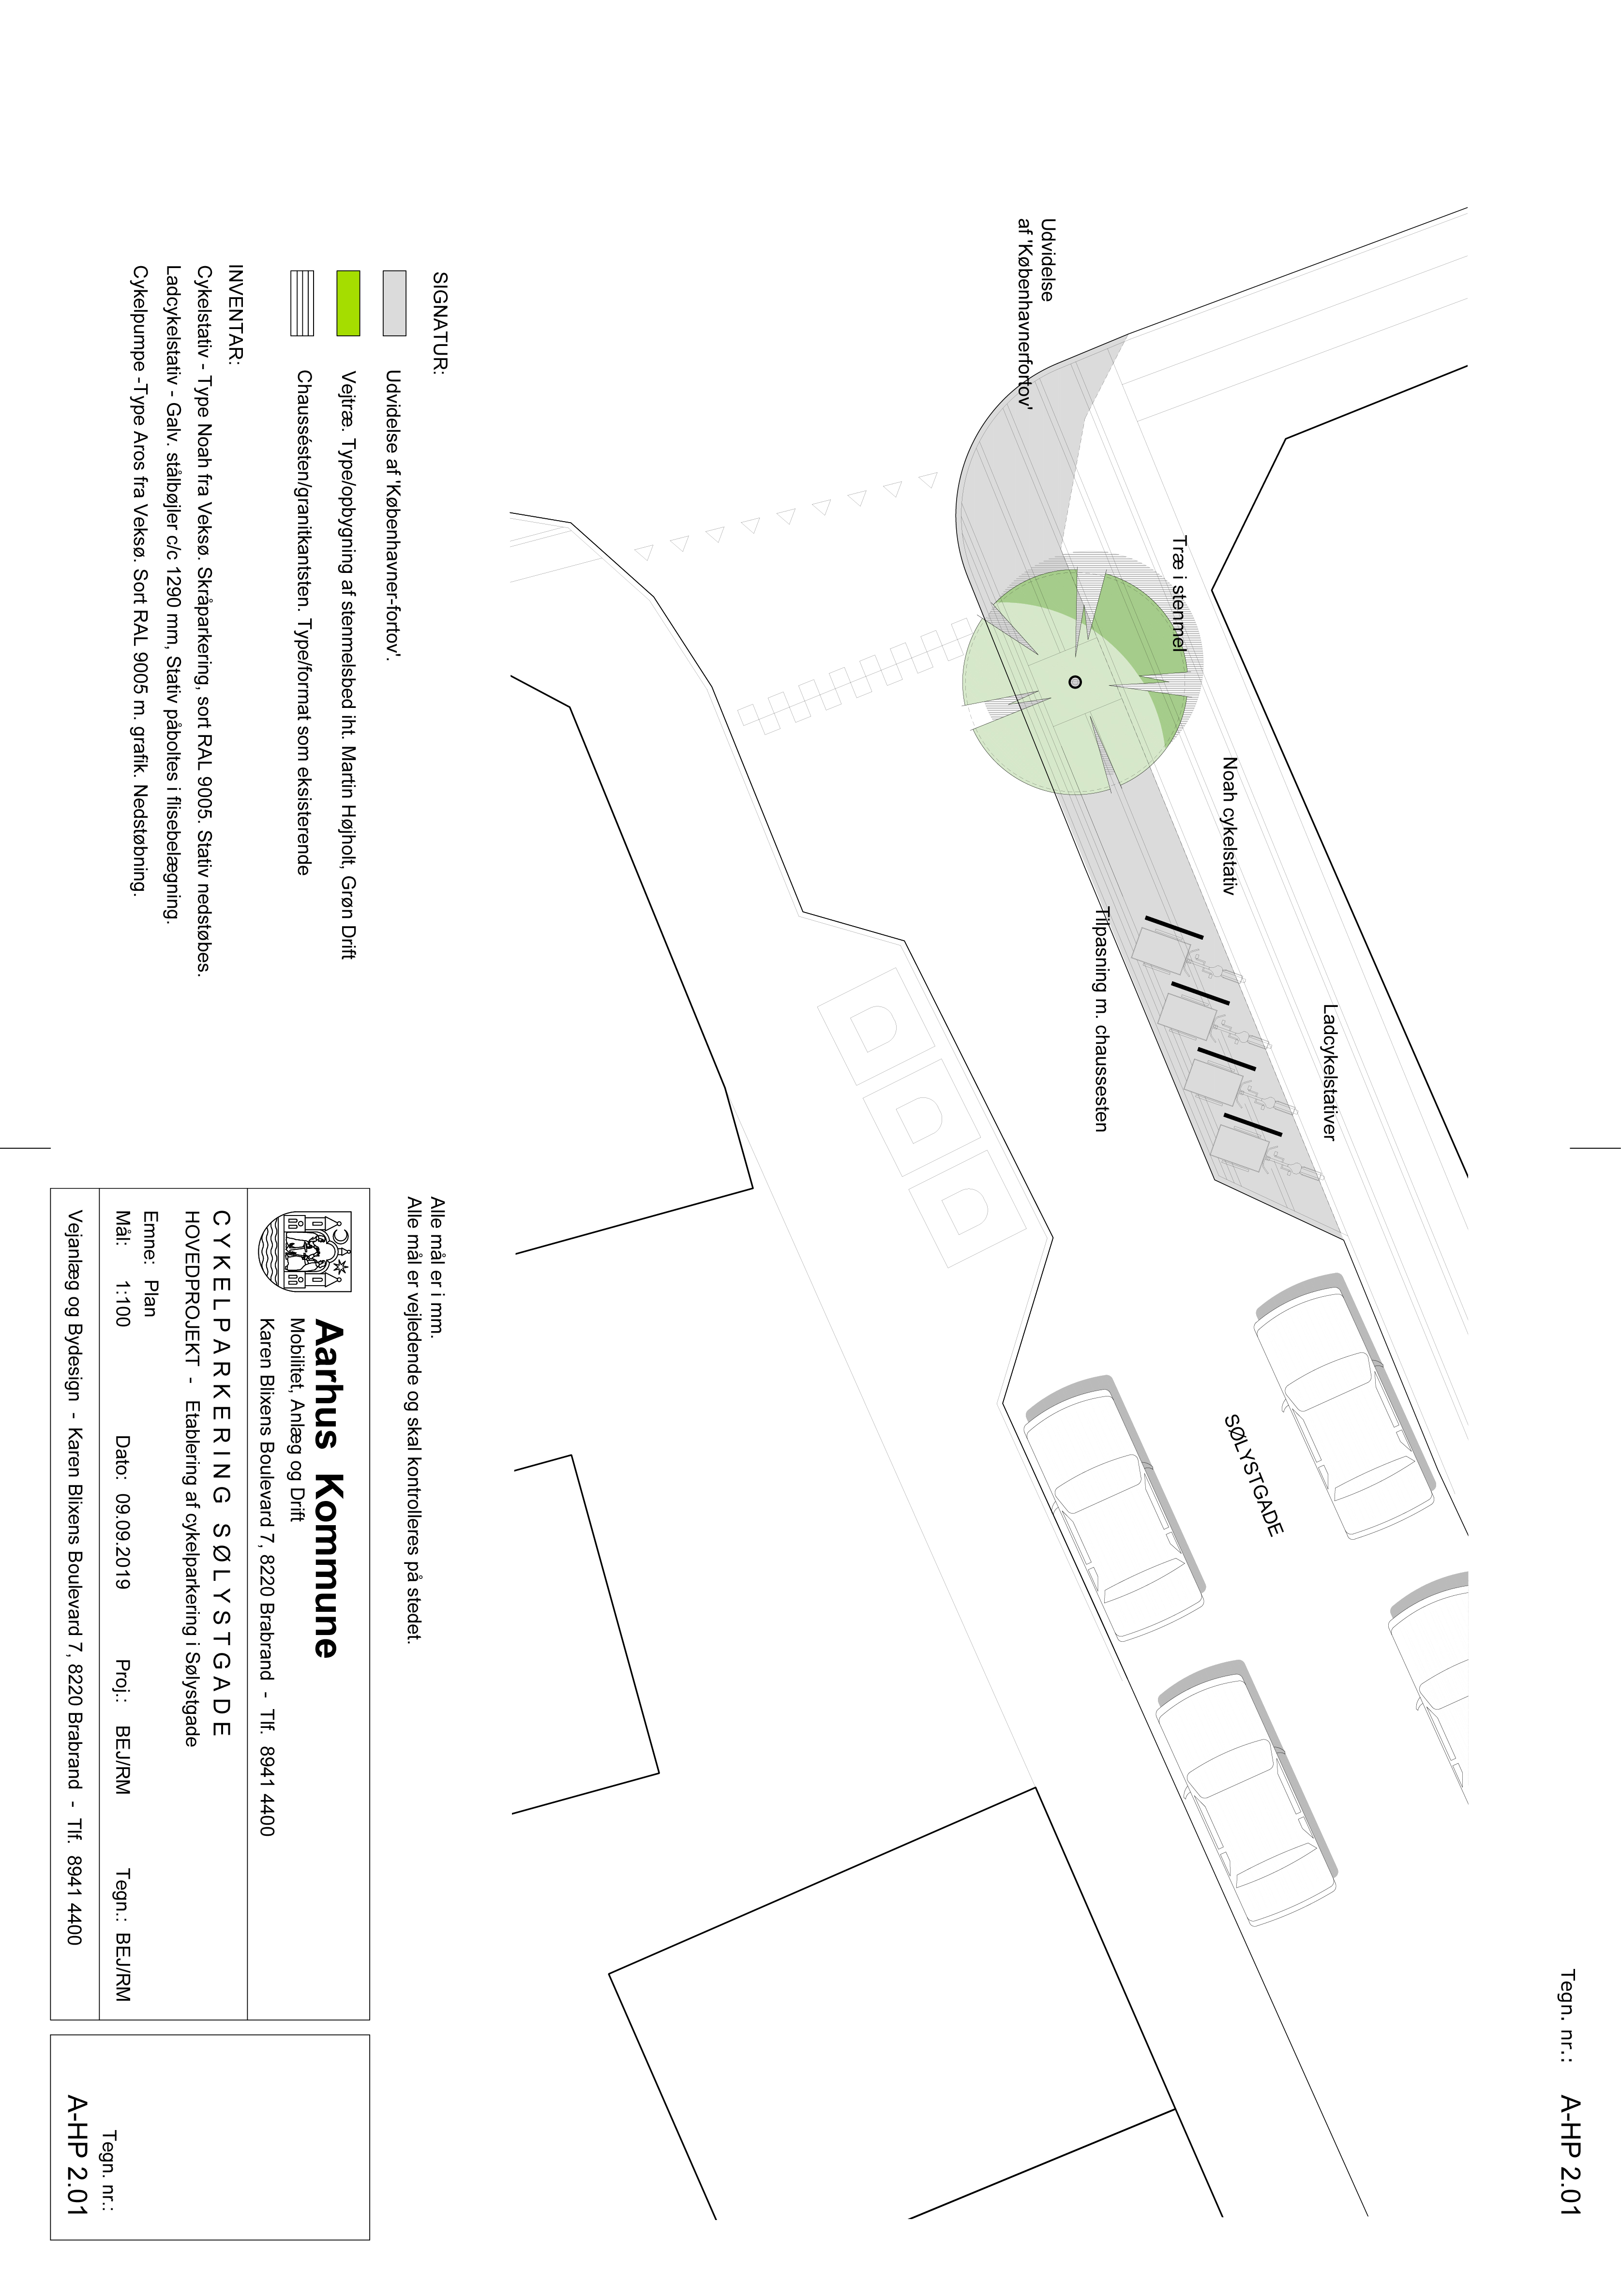 A sketch of the Aarhus Mobility Spot plan.